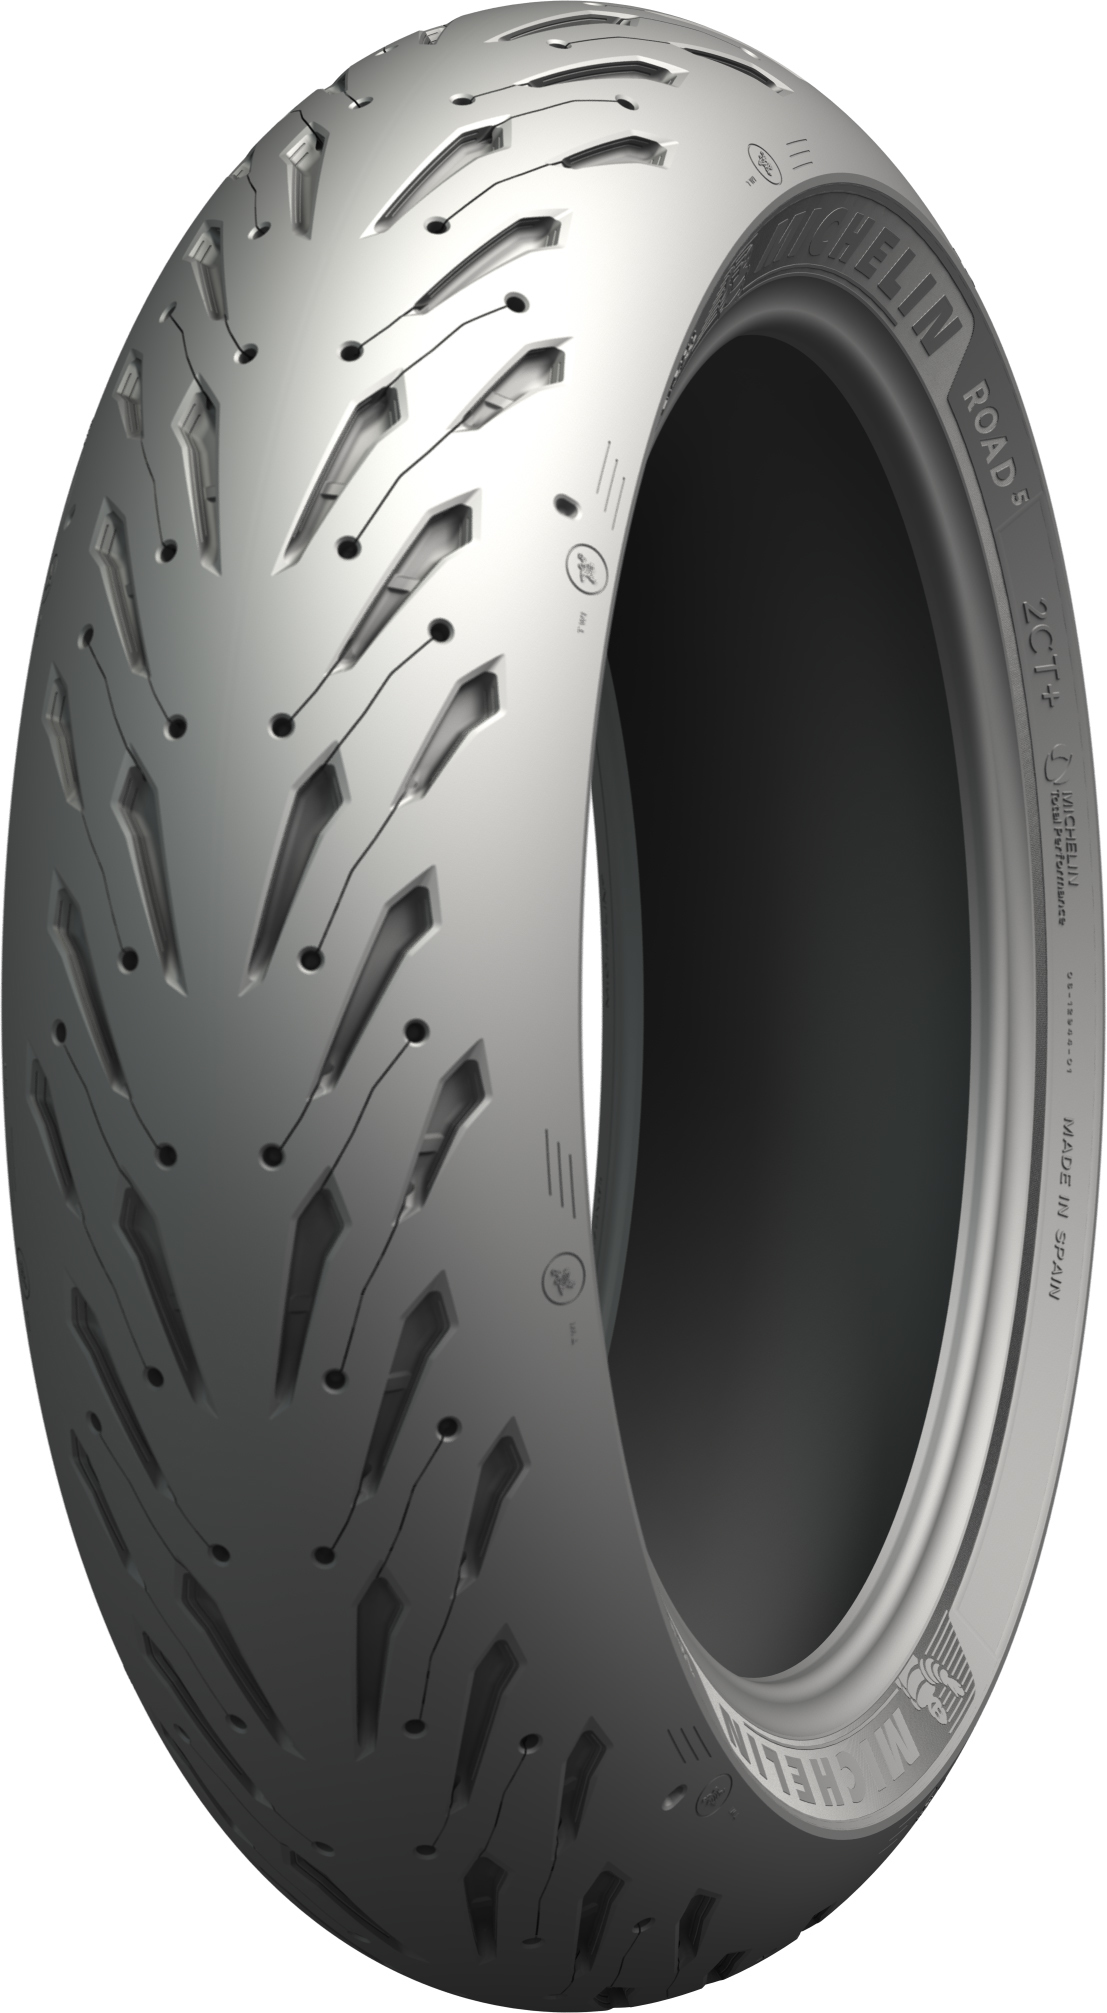 190/55ZR17 (75W) Road 5 Rear Motorcycle Tire - Road 5 Tire - Click Image to Close